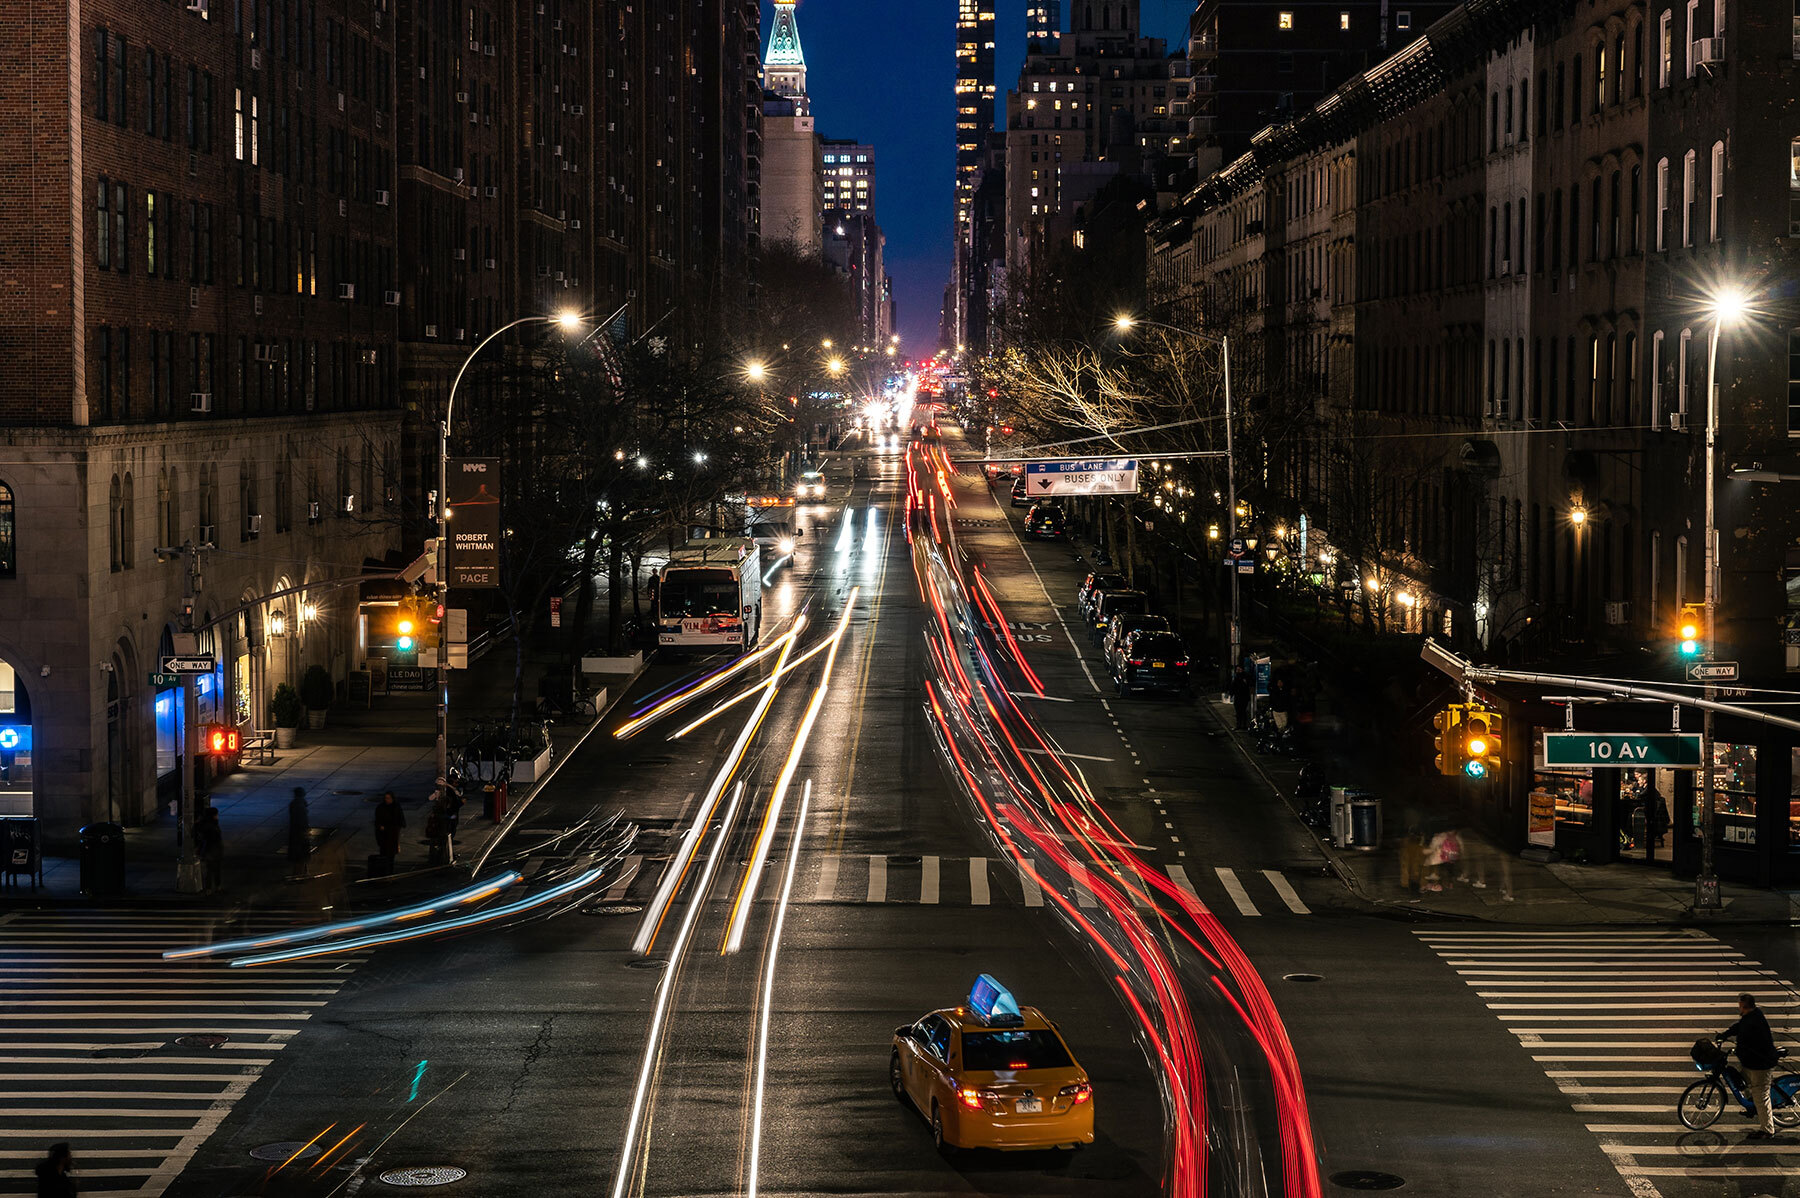 Timelapse photo of a busy intersection in New York City at night